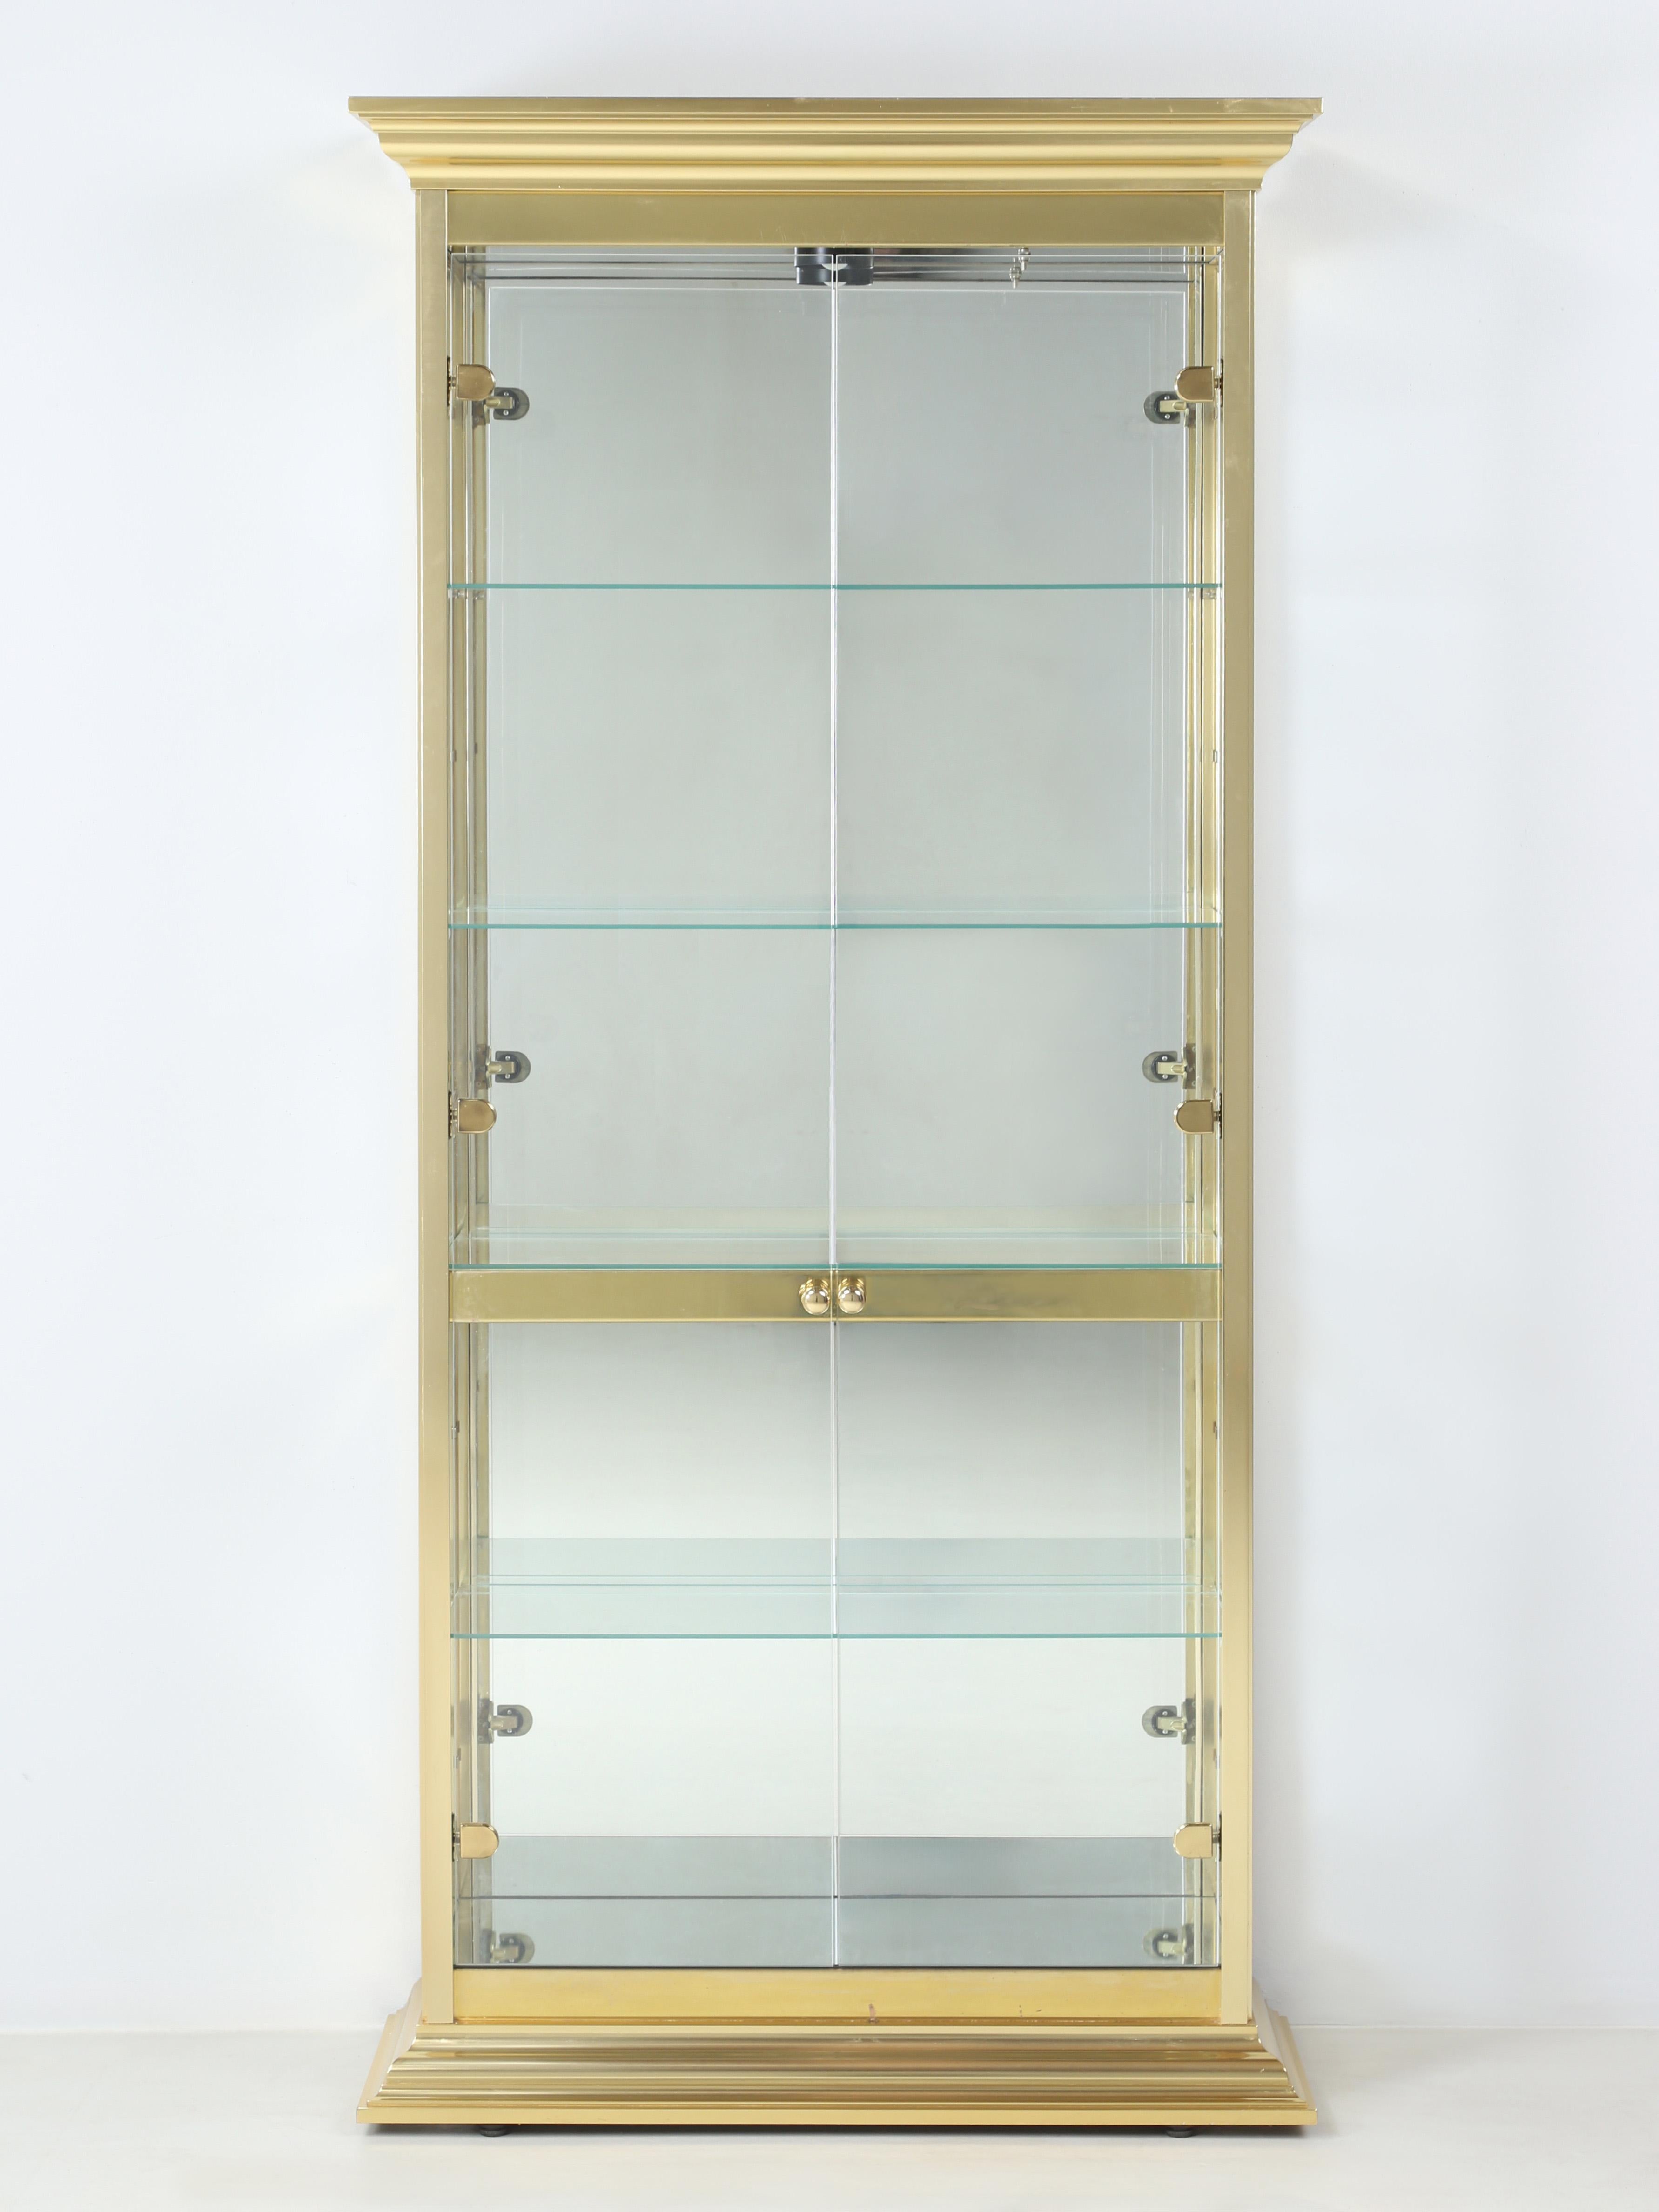 Modern Curio Cabinet that was made right here in America by the Glober Manufacturing Company of Carpentersville, Illinois. The Curio-Cabinet was constructed from solid brass and glass with a mirror back and floor panel and above lighting. The glass